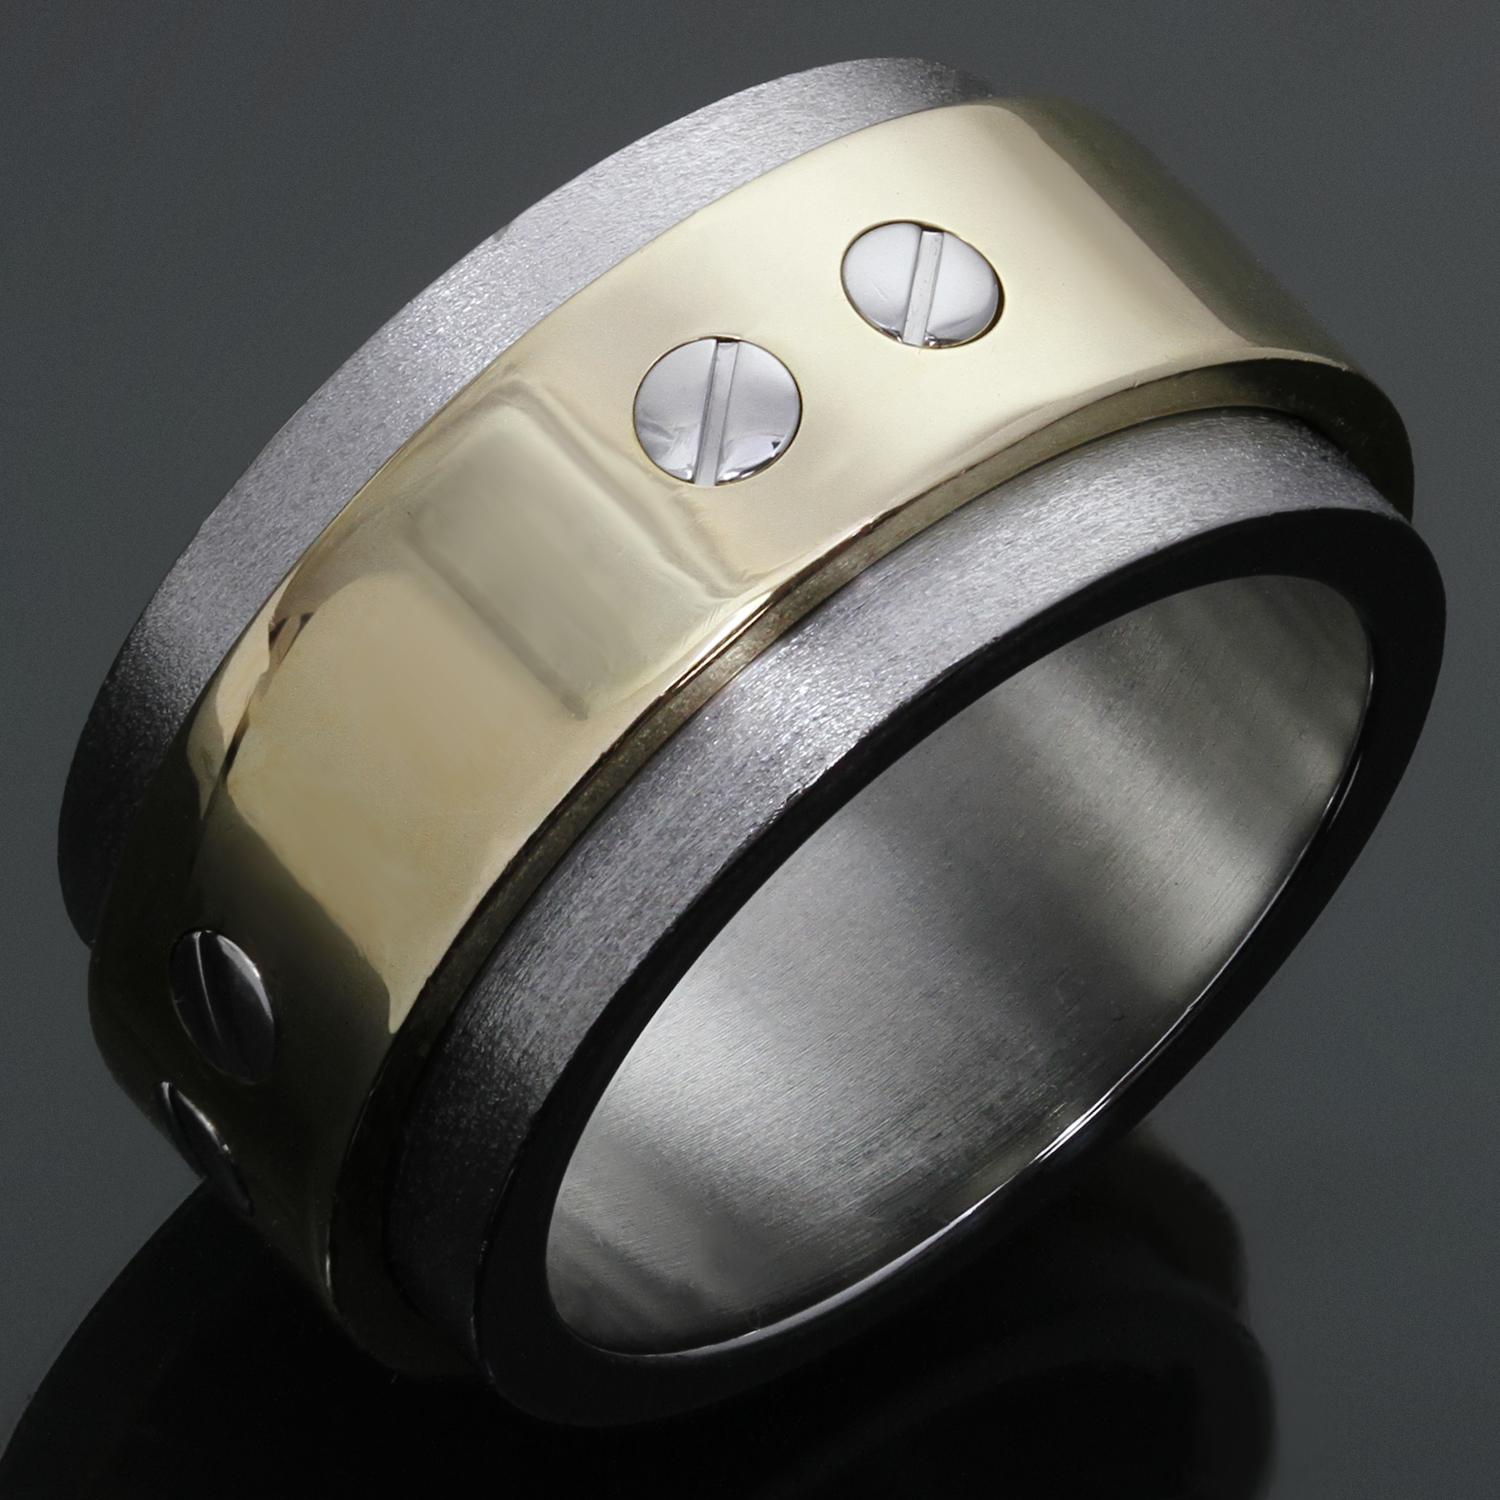 This classic Cartier ring from the iconic Santos collection is crafted in 18k yellow gold and stainless steel and accented with the signature screw elements. Made in France circa 1990s. Measurements: 0.47